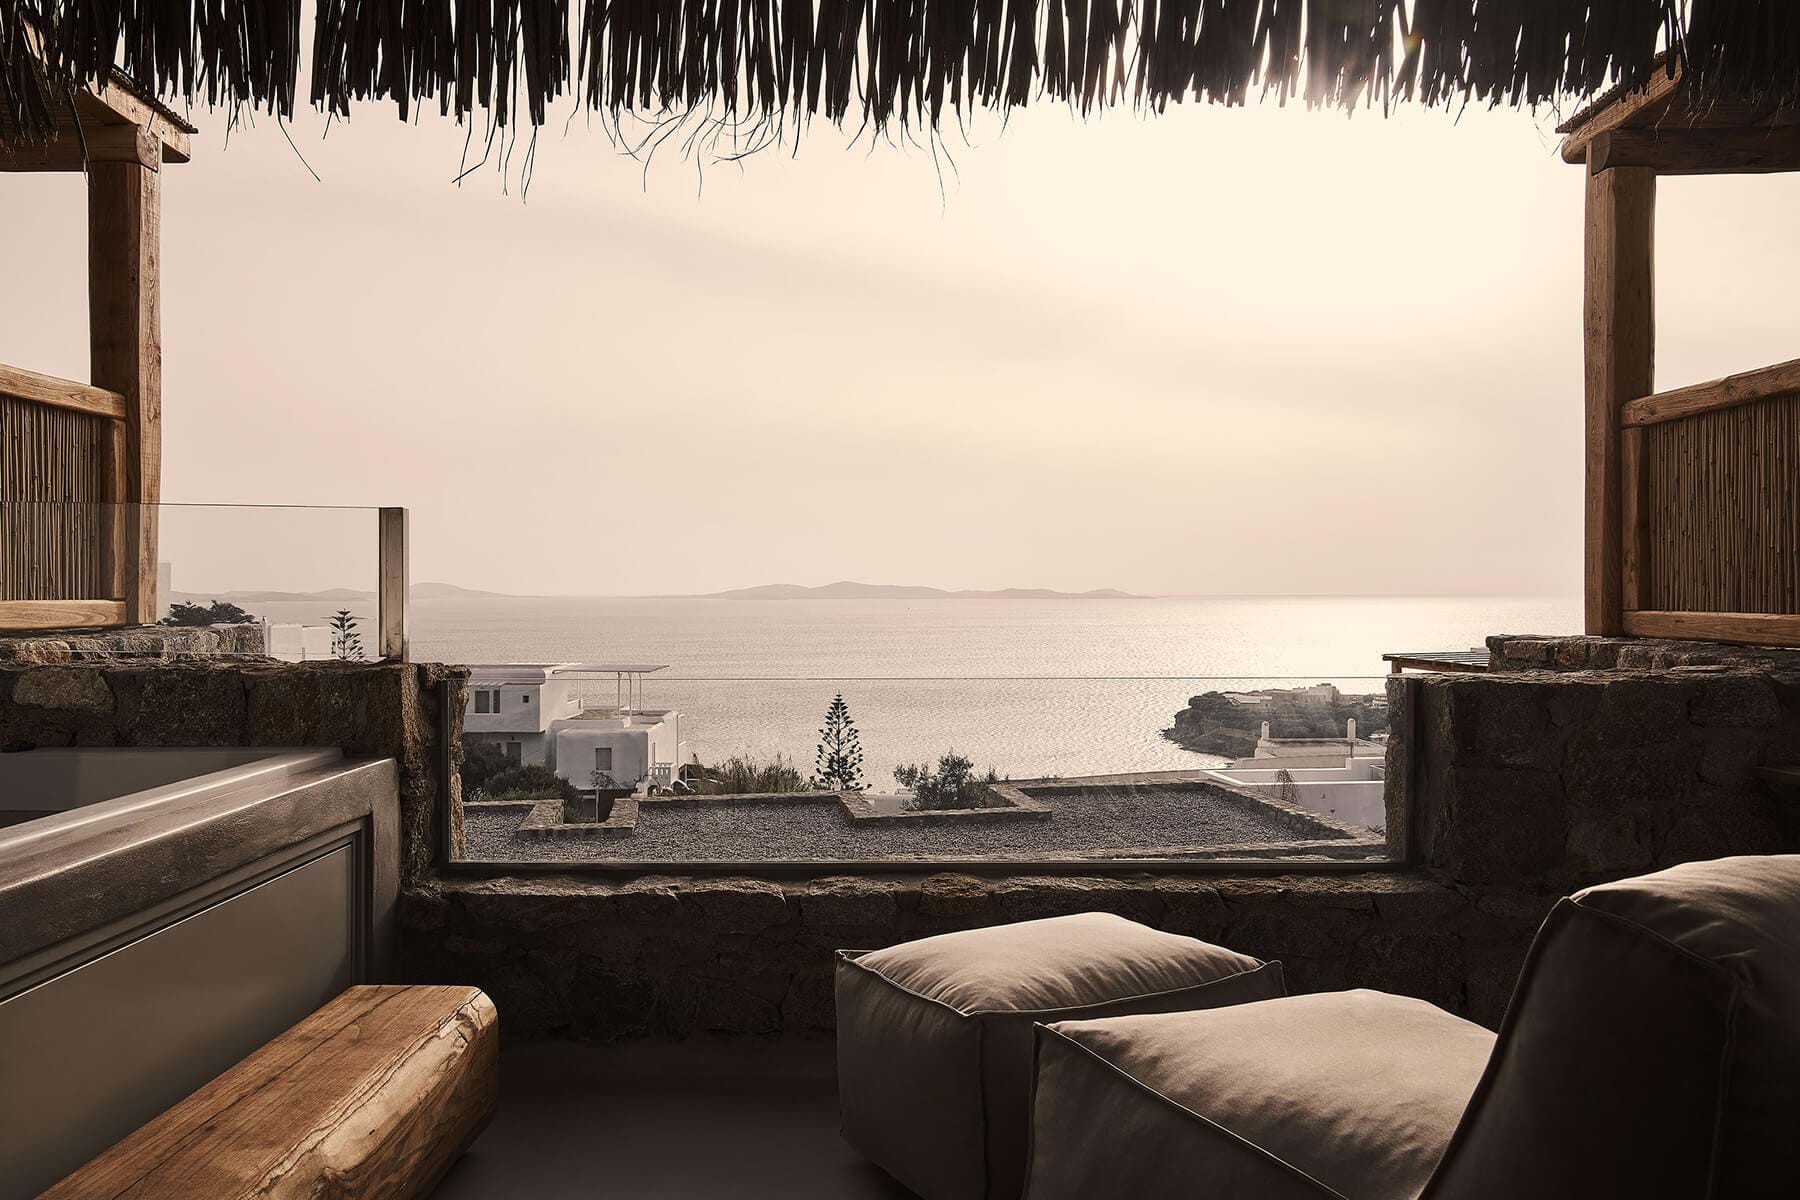 Amyth of Mykonos Agios Stefanos - Delos Sea View Suite with Jetted Tub